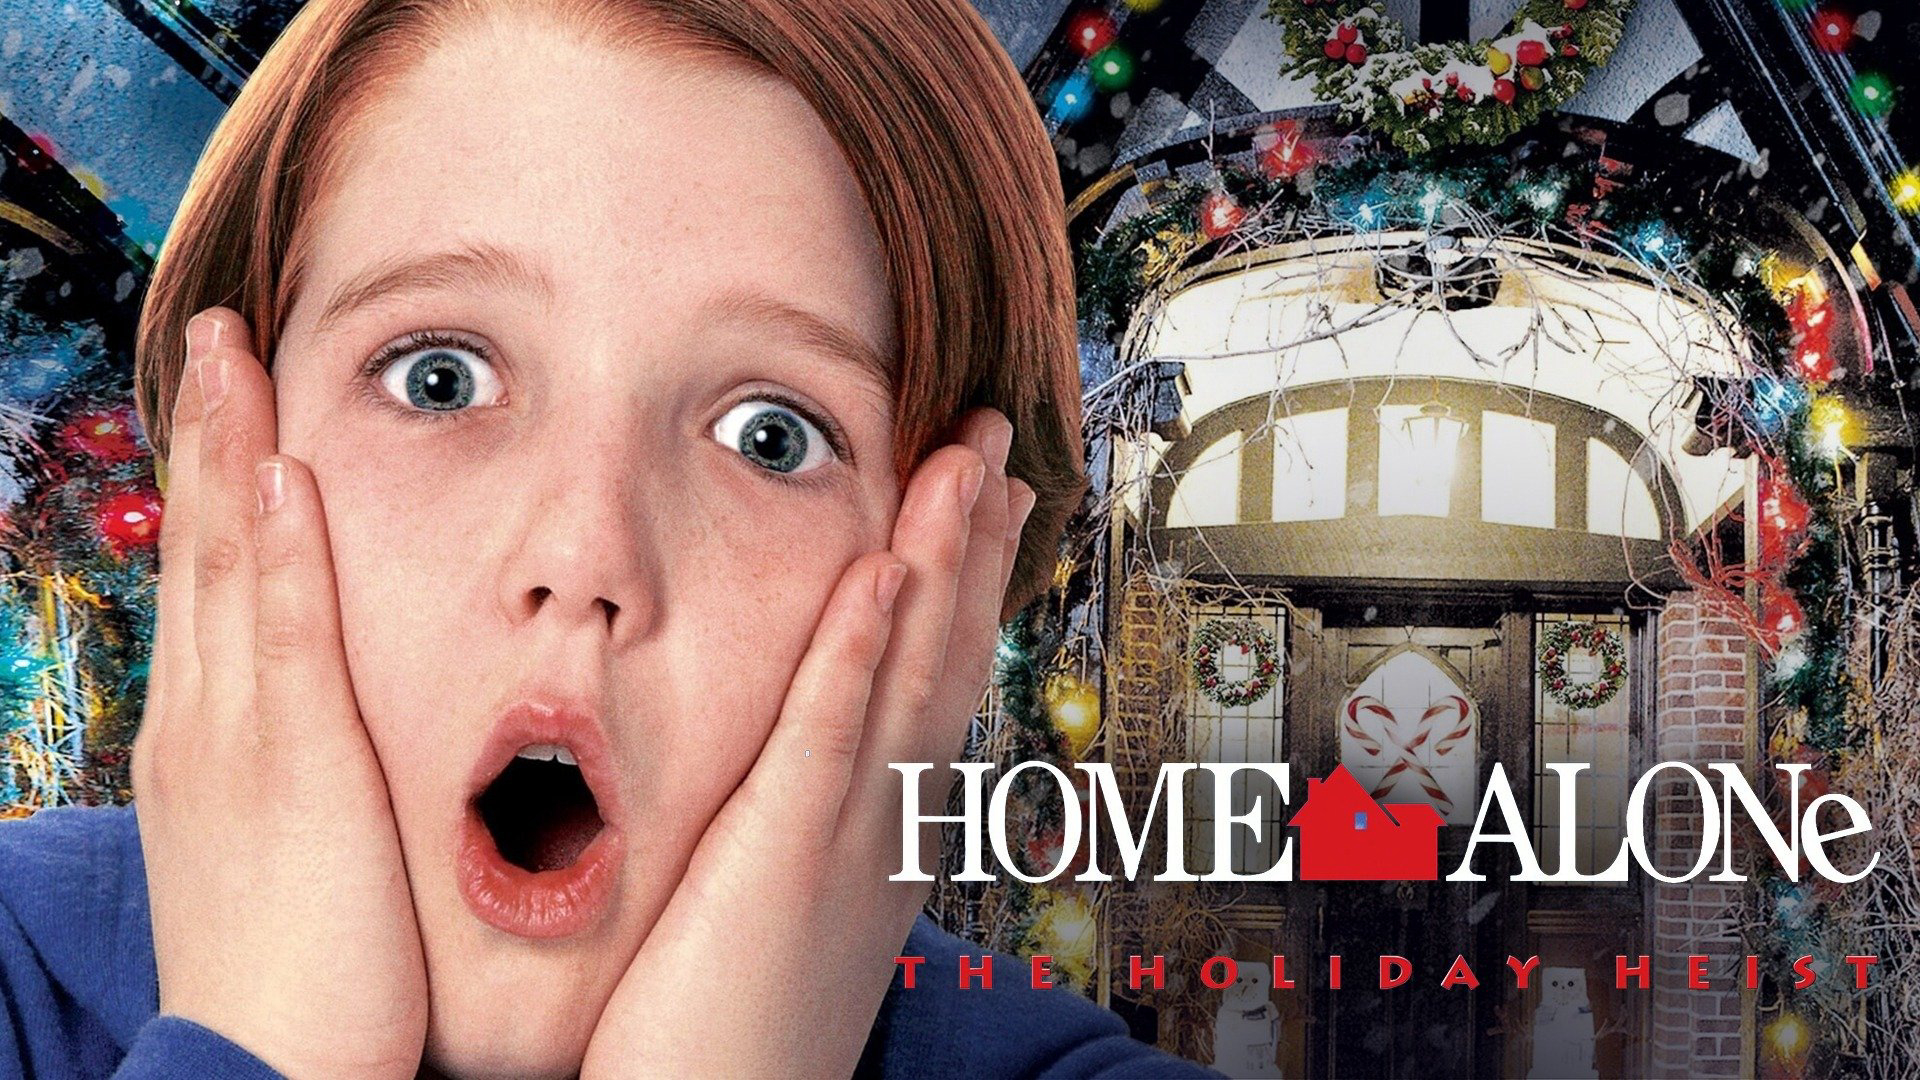 Home Alone: The Holiday Heist Home Alone: The Holiday Heist